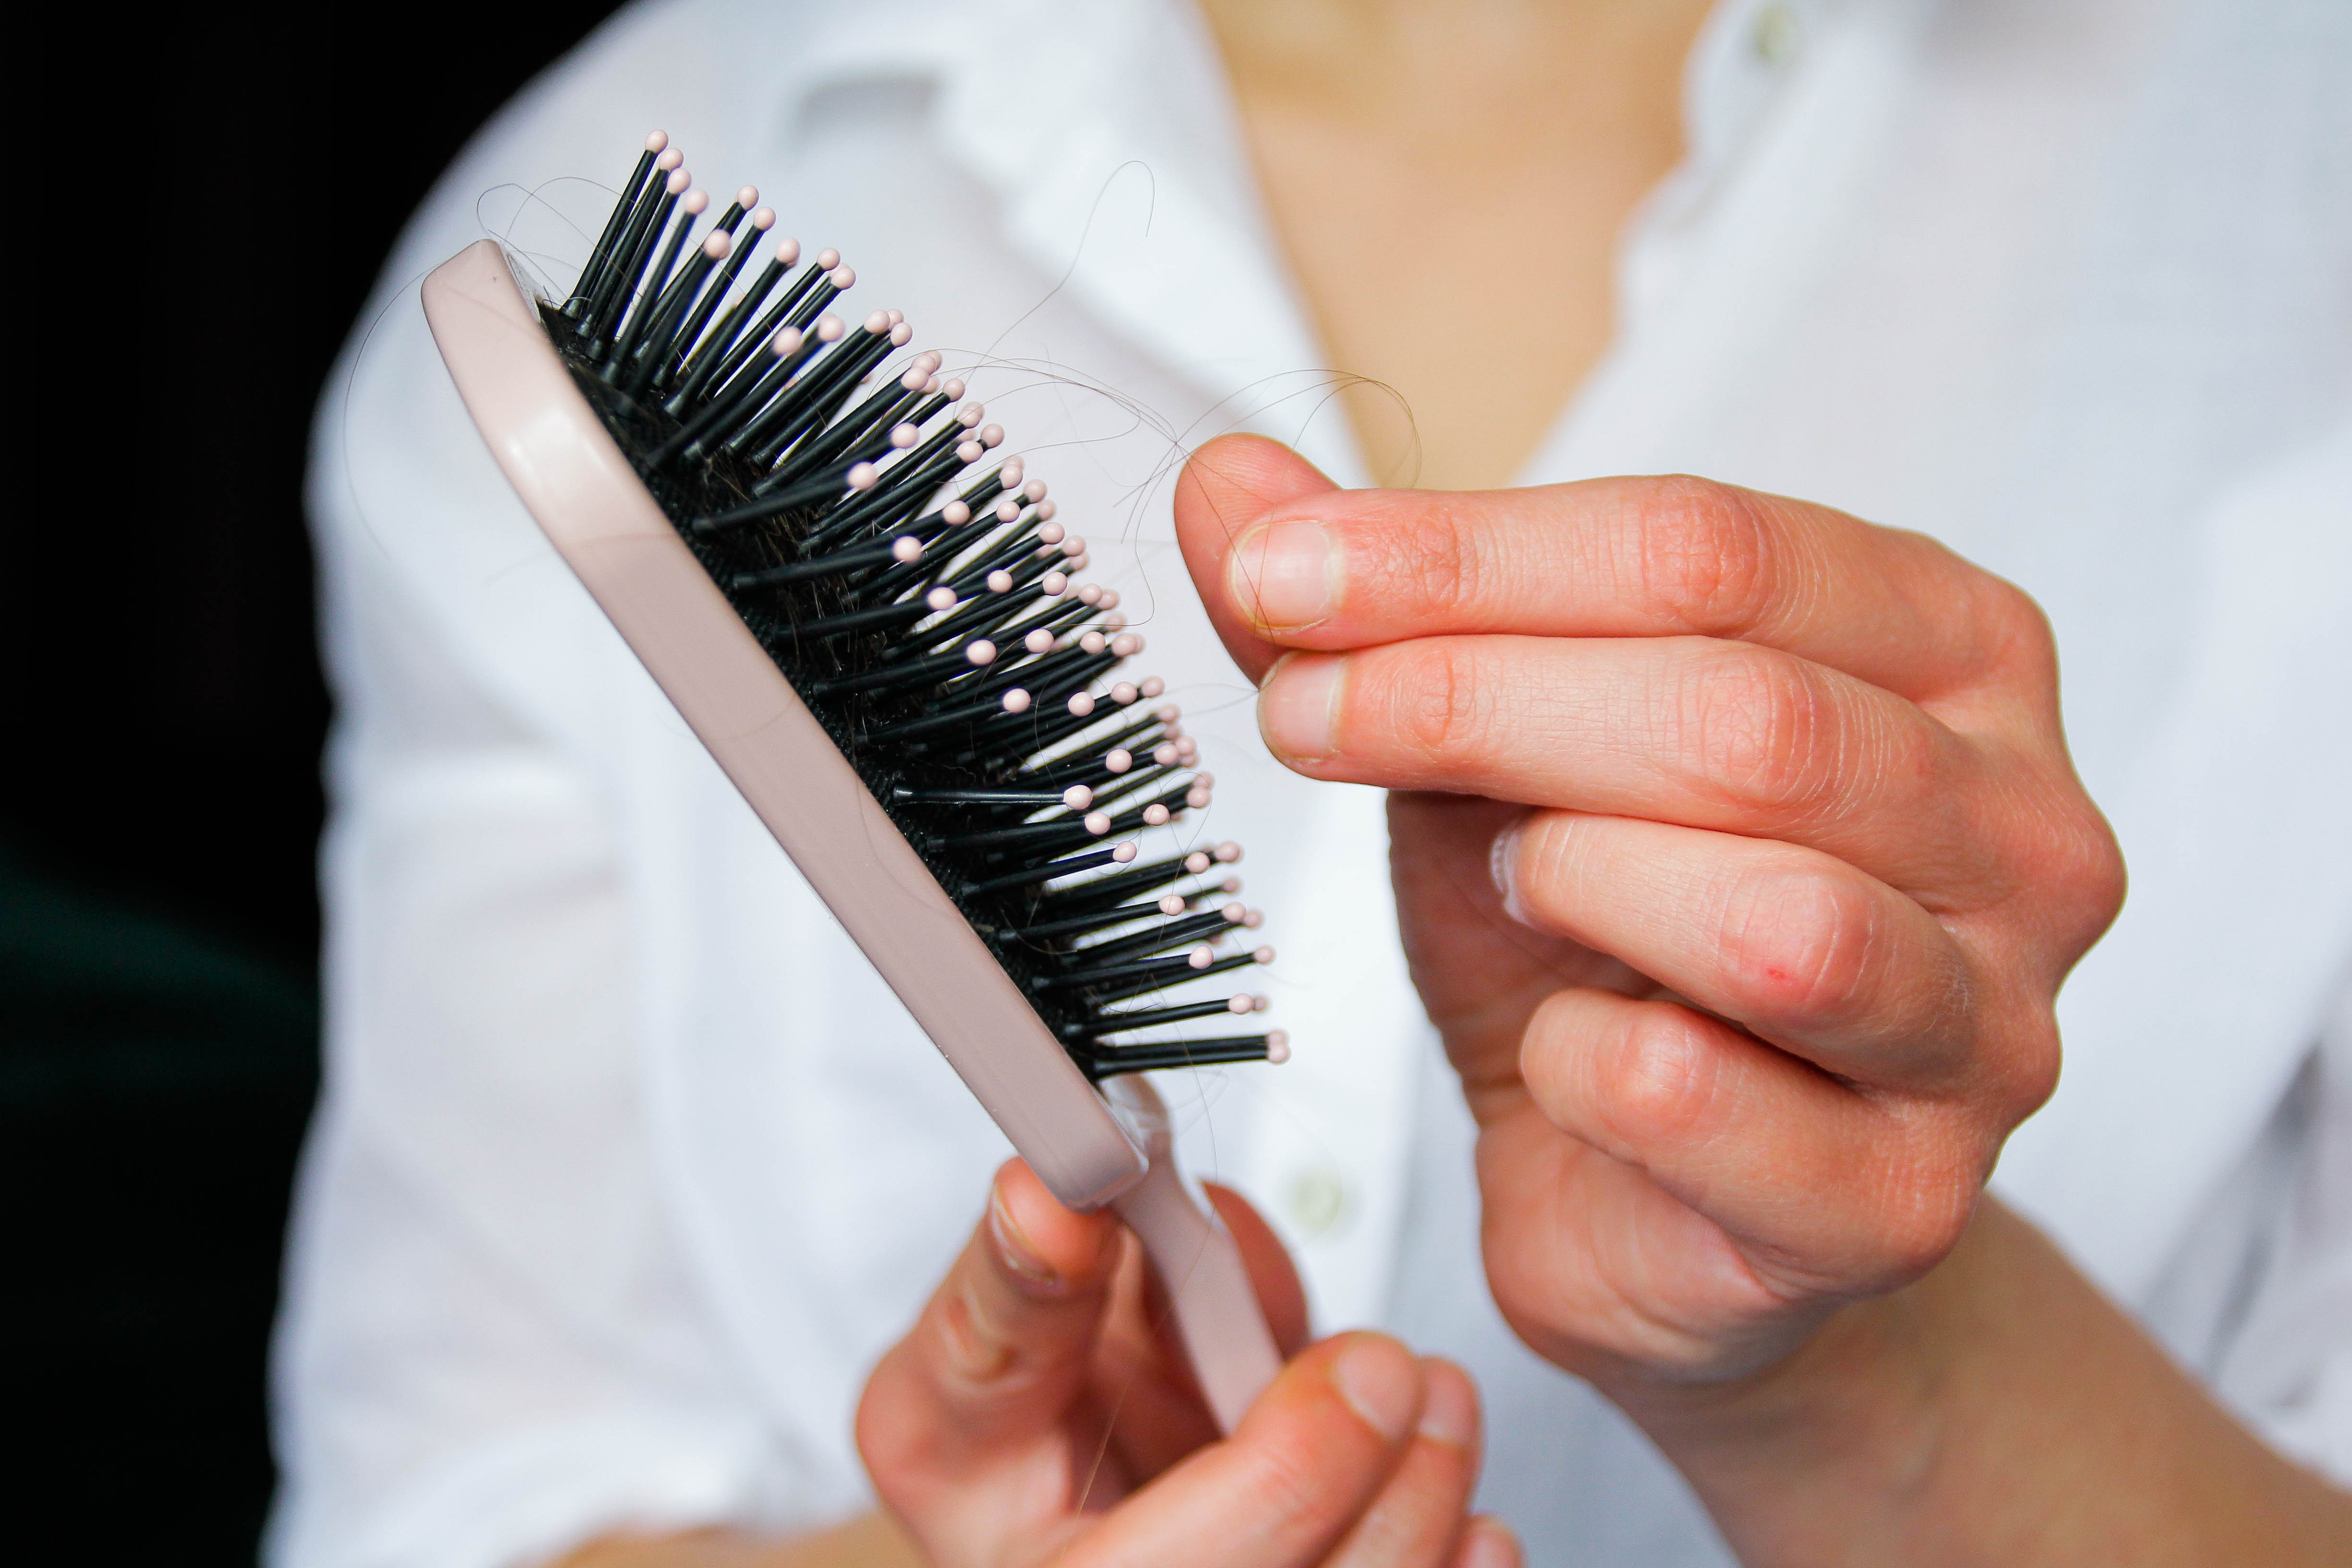 8 Medications That Can Cause Hair Loss, and How to Reserve It | livestrong